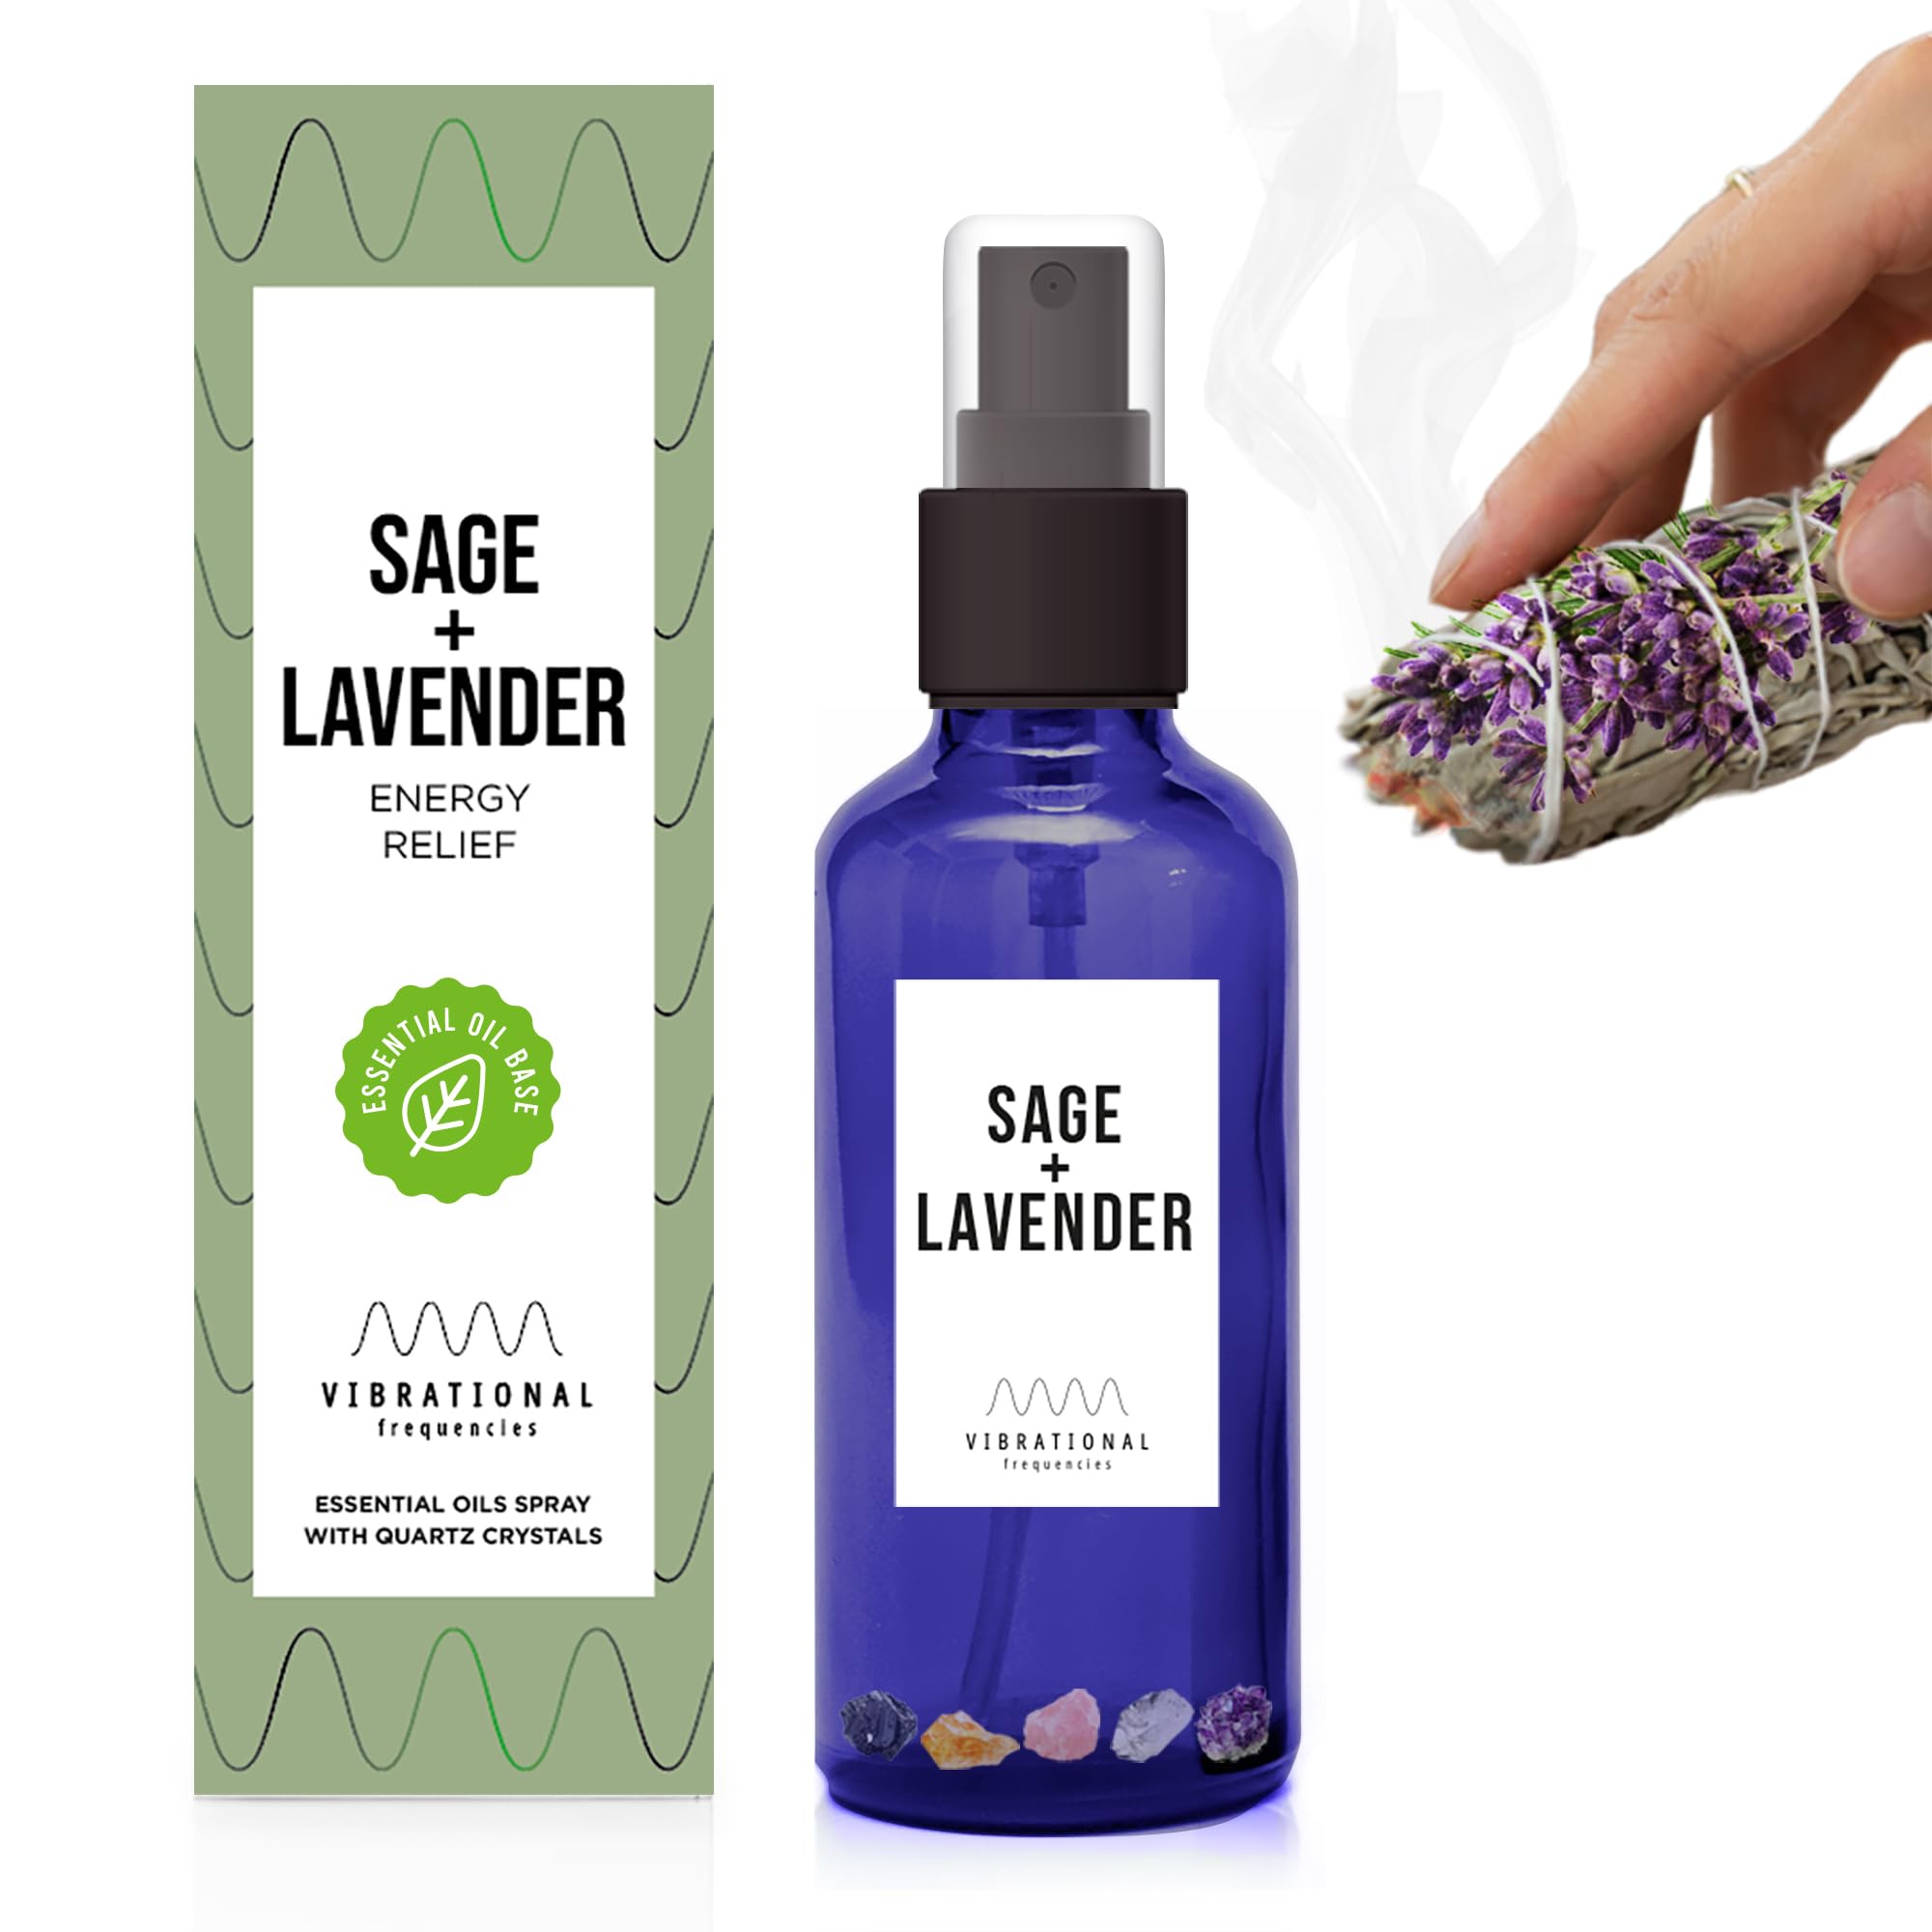 Sage Lavender Smudge Spray with Quartz Crystals for Body and Space, Spiritual Spray, Natural Air Freshener Spray, Home Fragrance Mist Hydrosol Sprayer, Smudging Fragrant Room Sprays (Sage + Lavender)